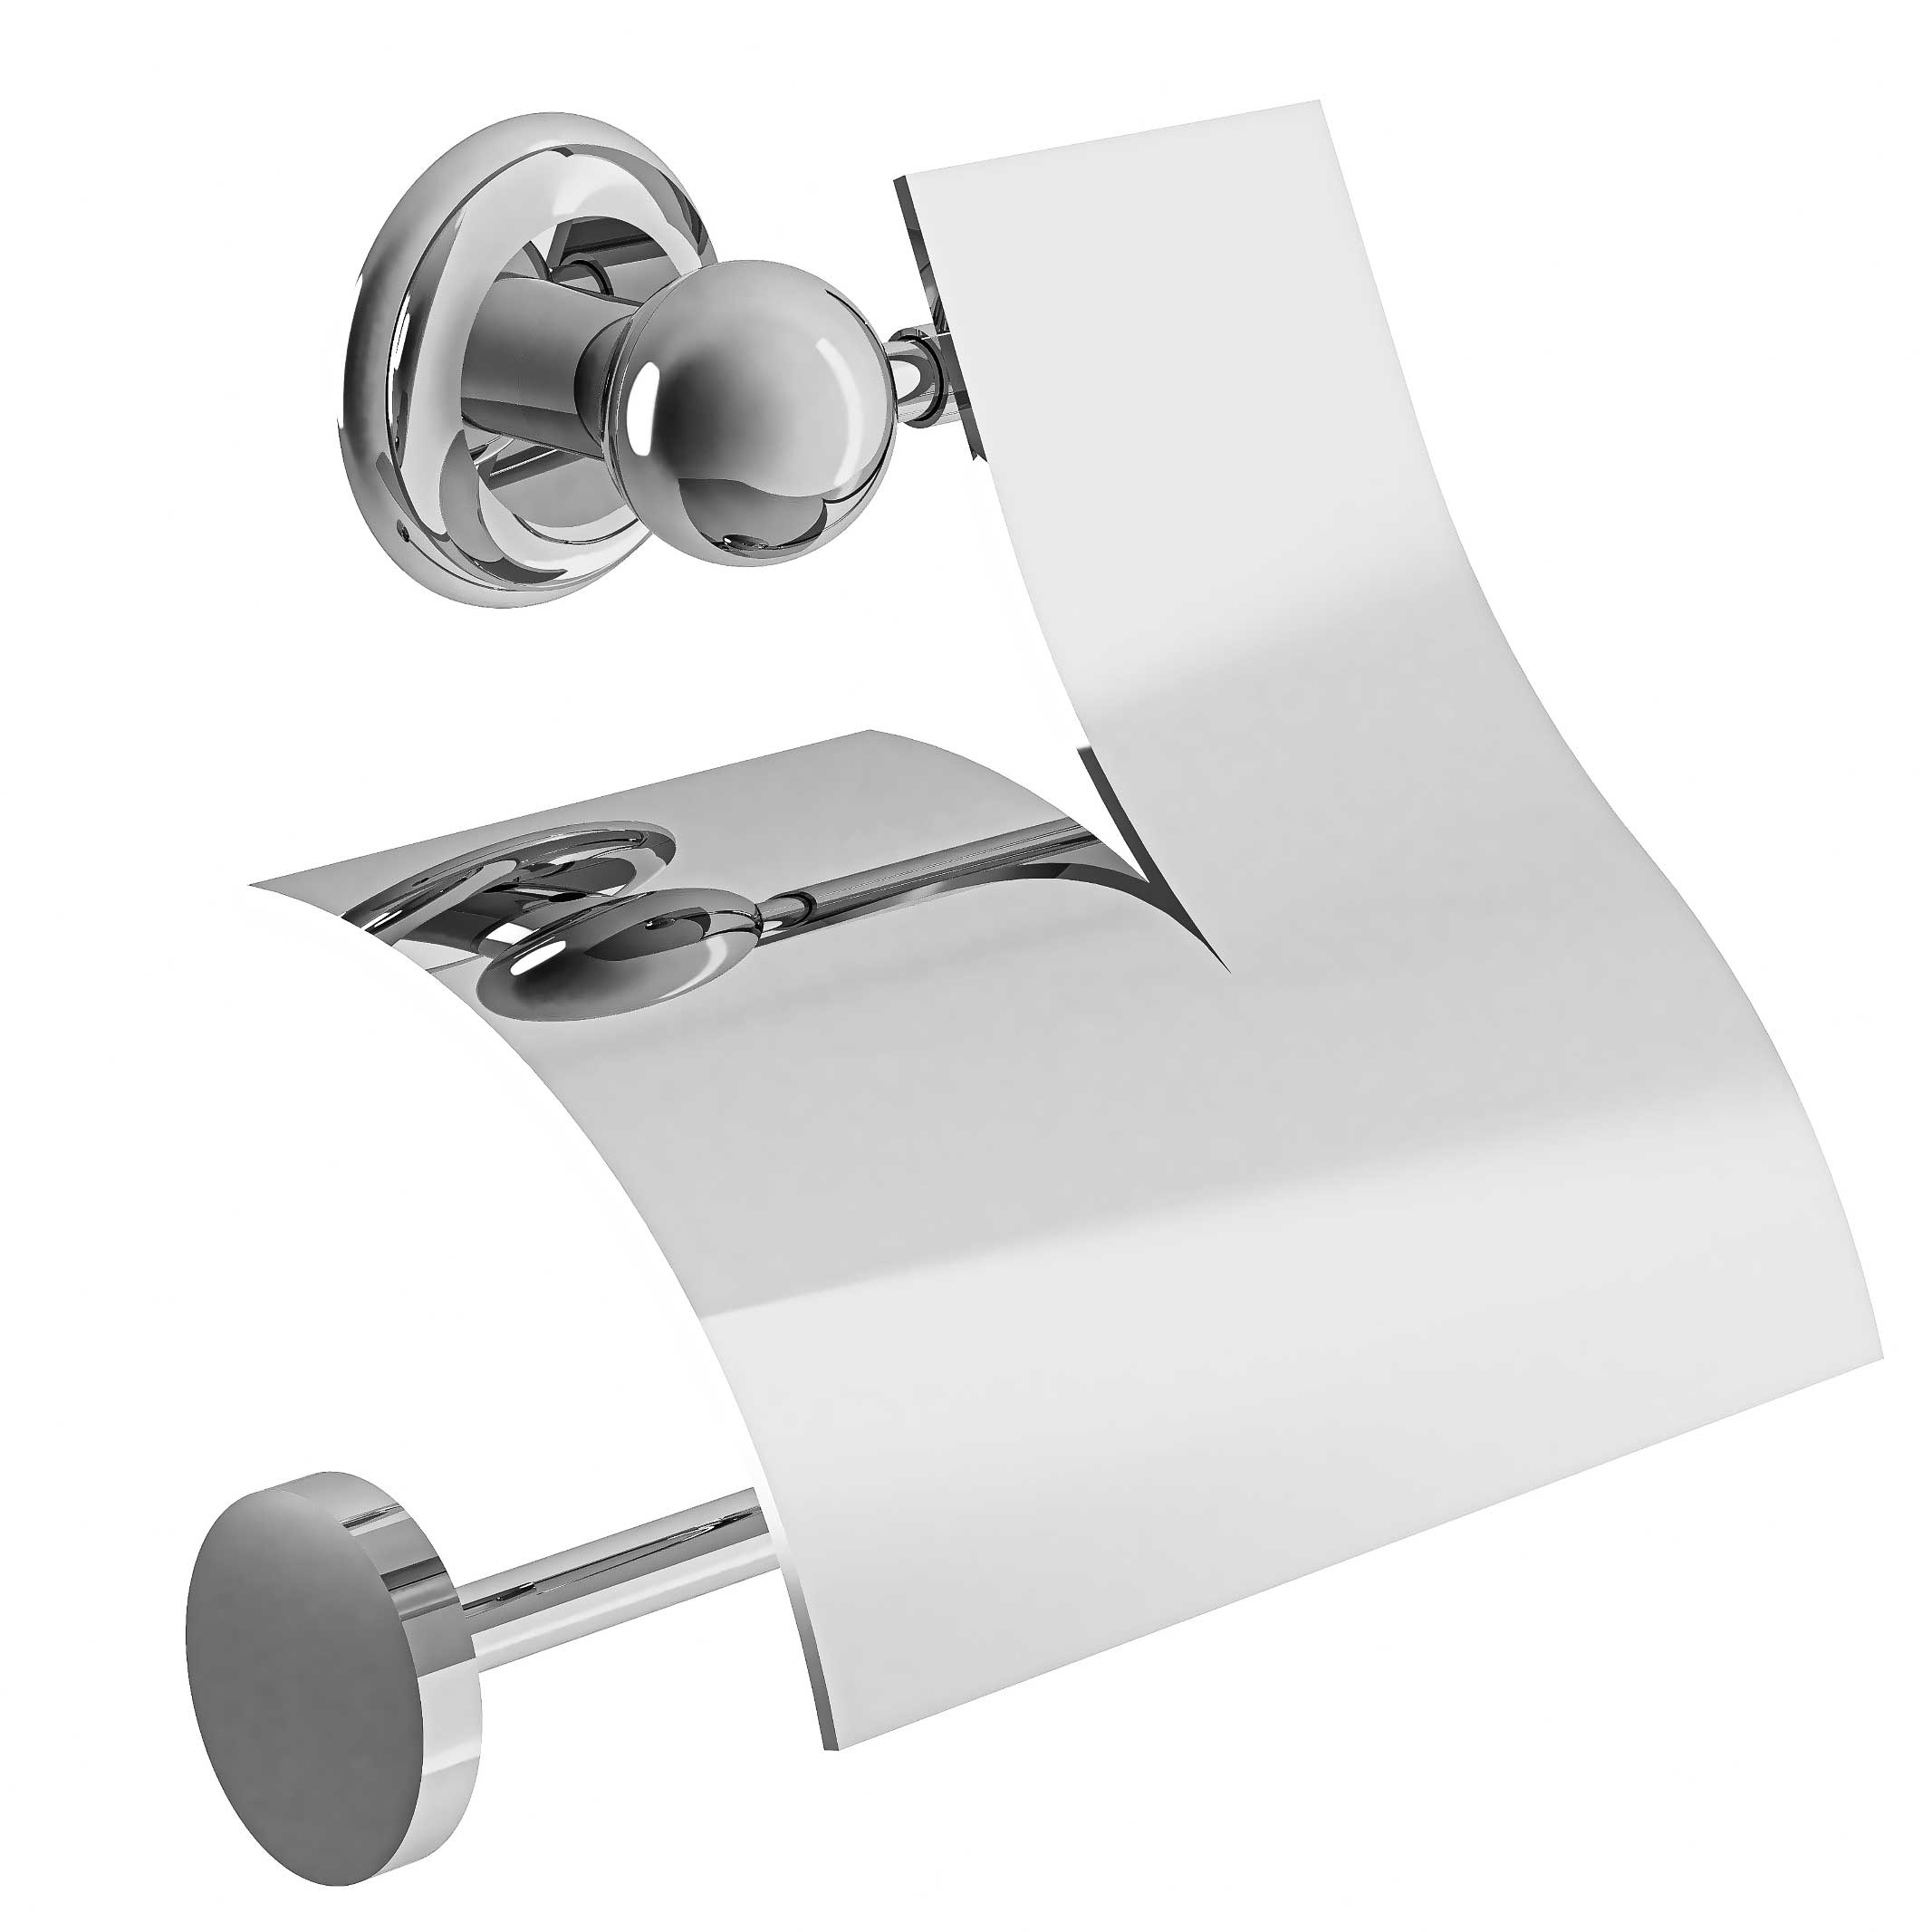 M40-503 Toilet roll holder with cover